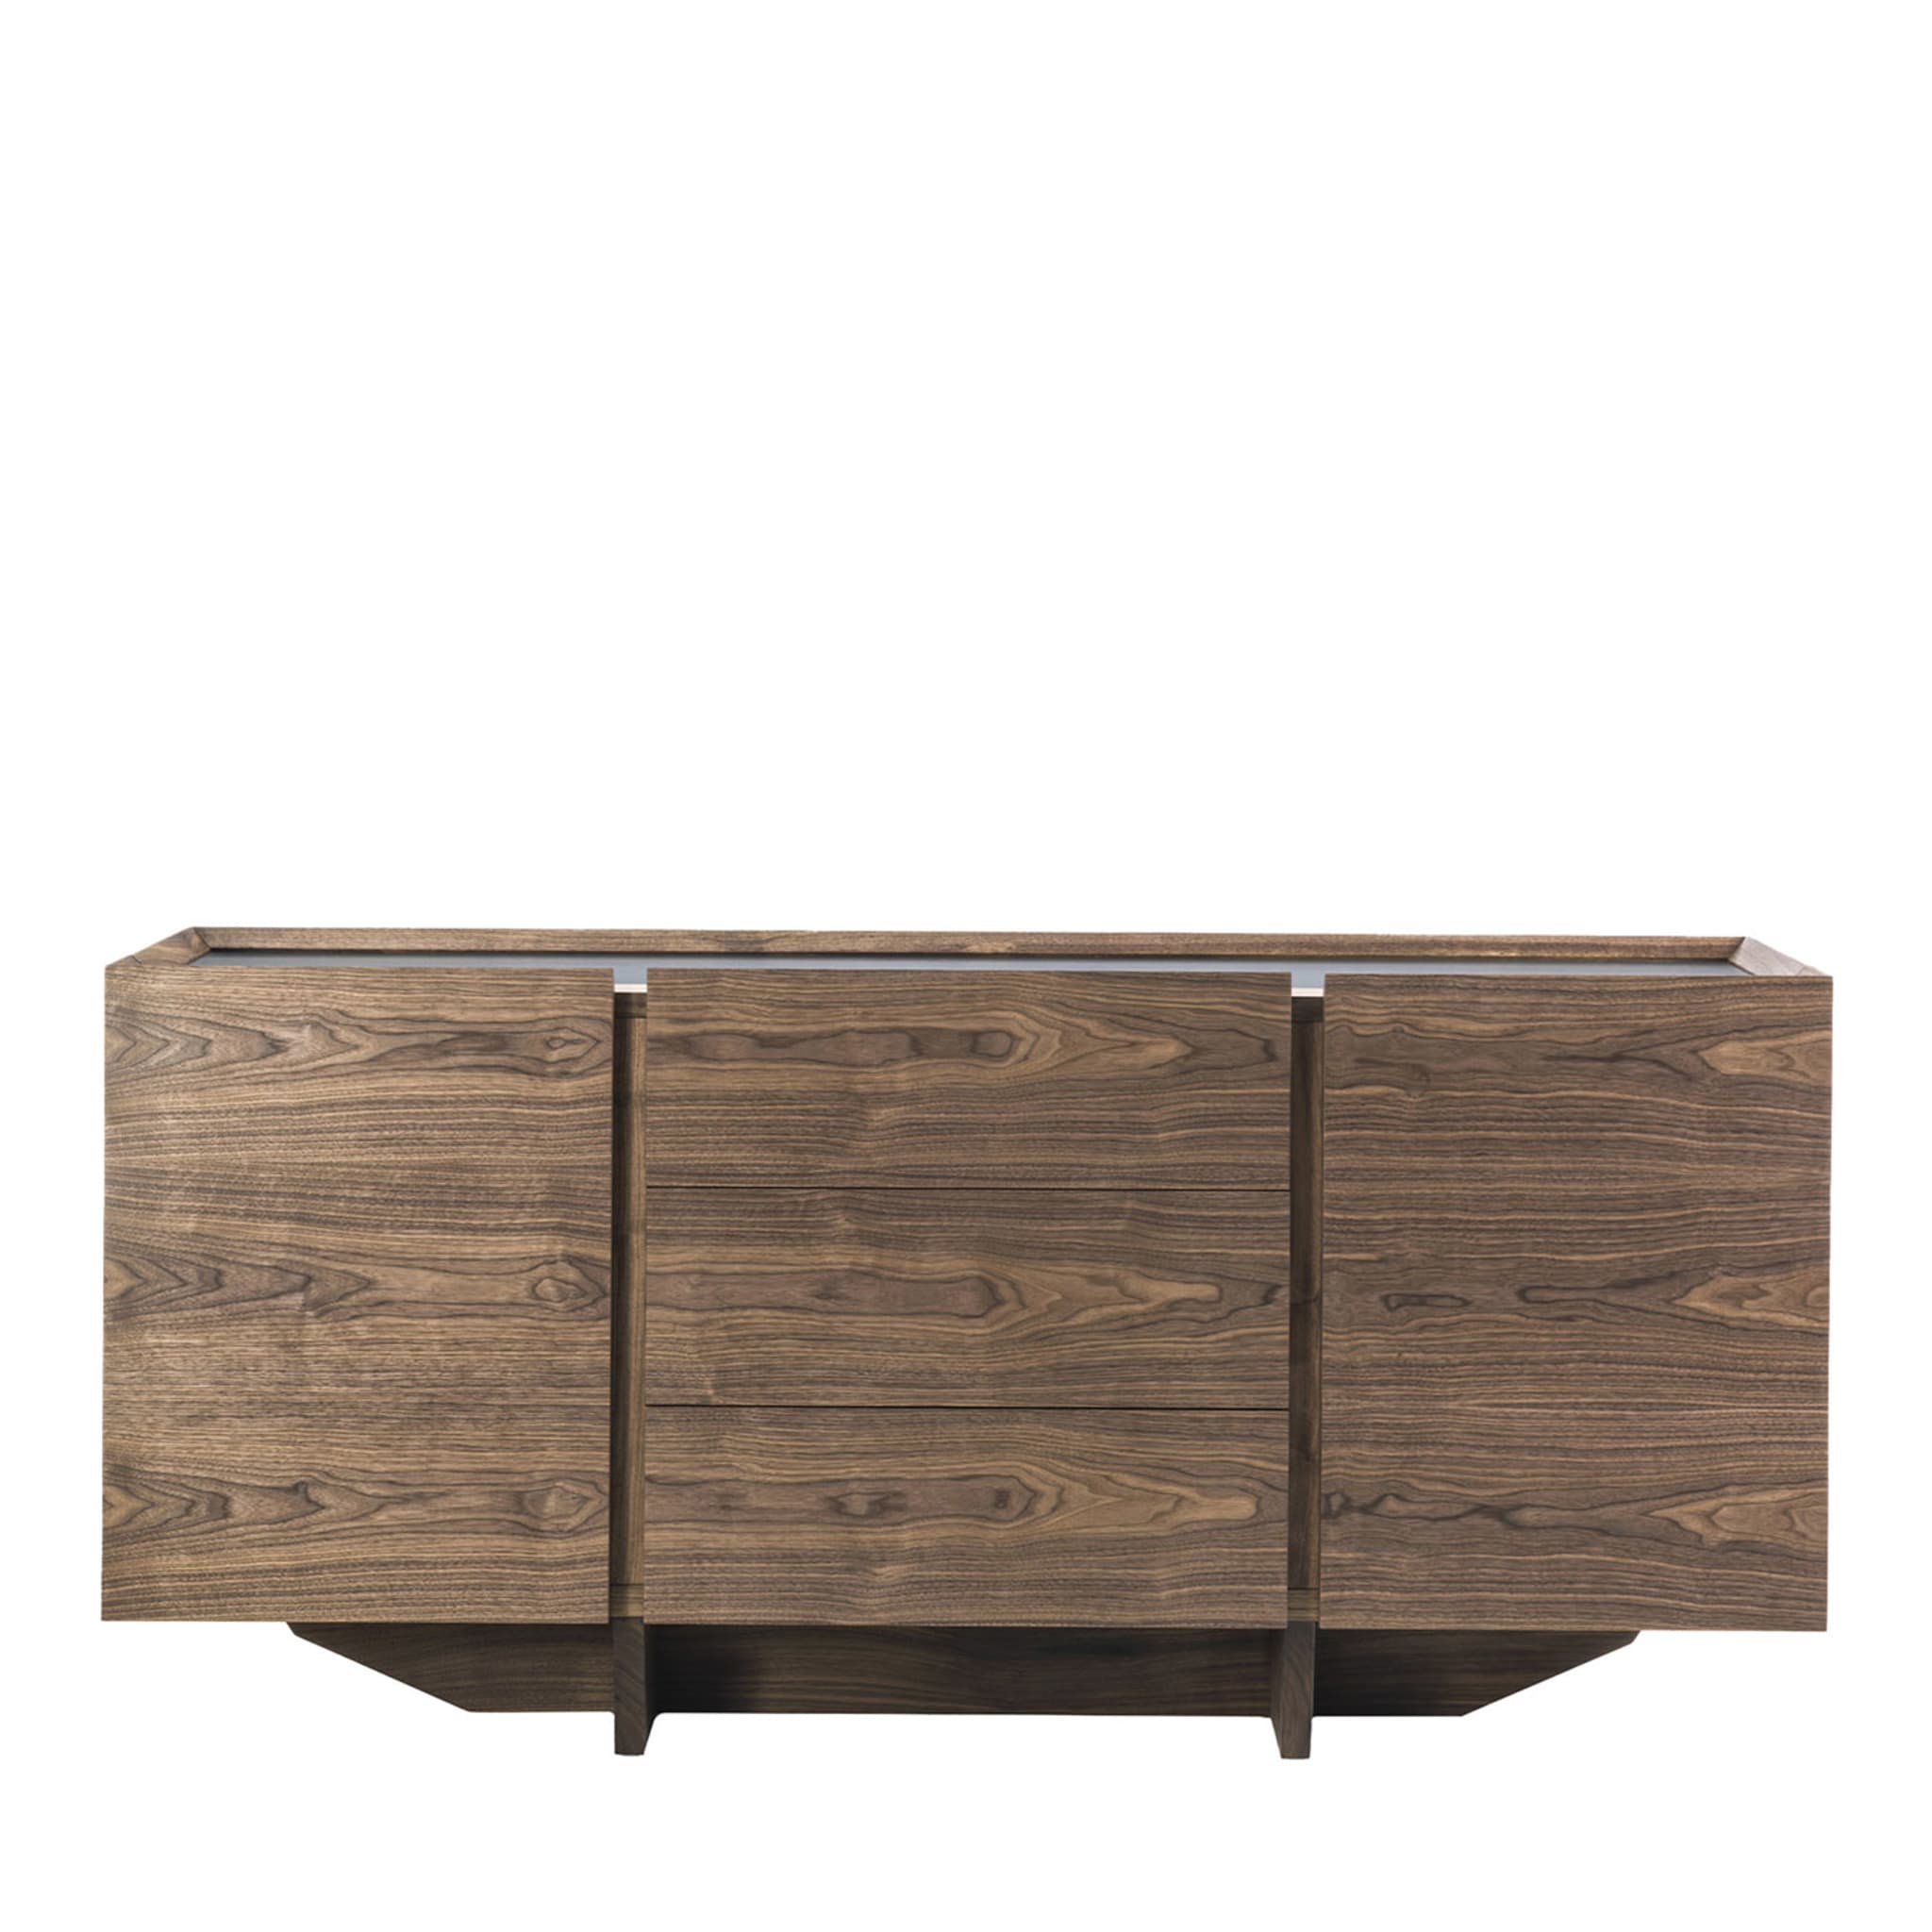 Pandora Small Sideboard by Giuliano & Gabriele Cappelletti - Main view